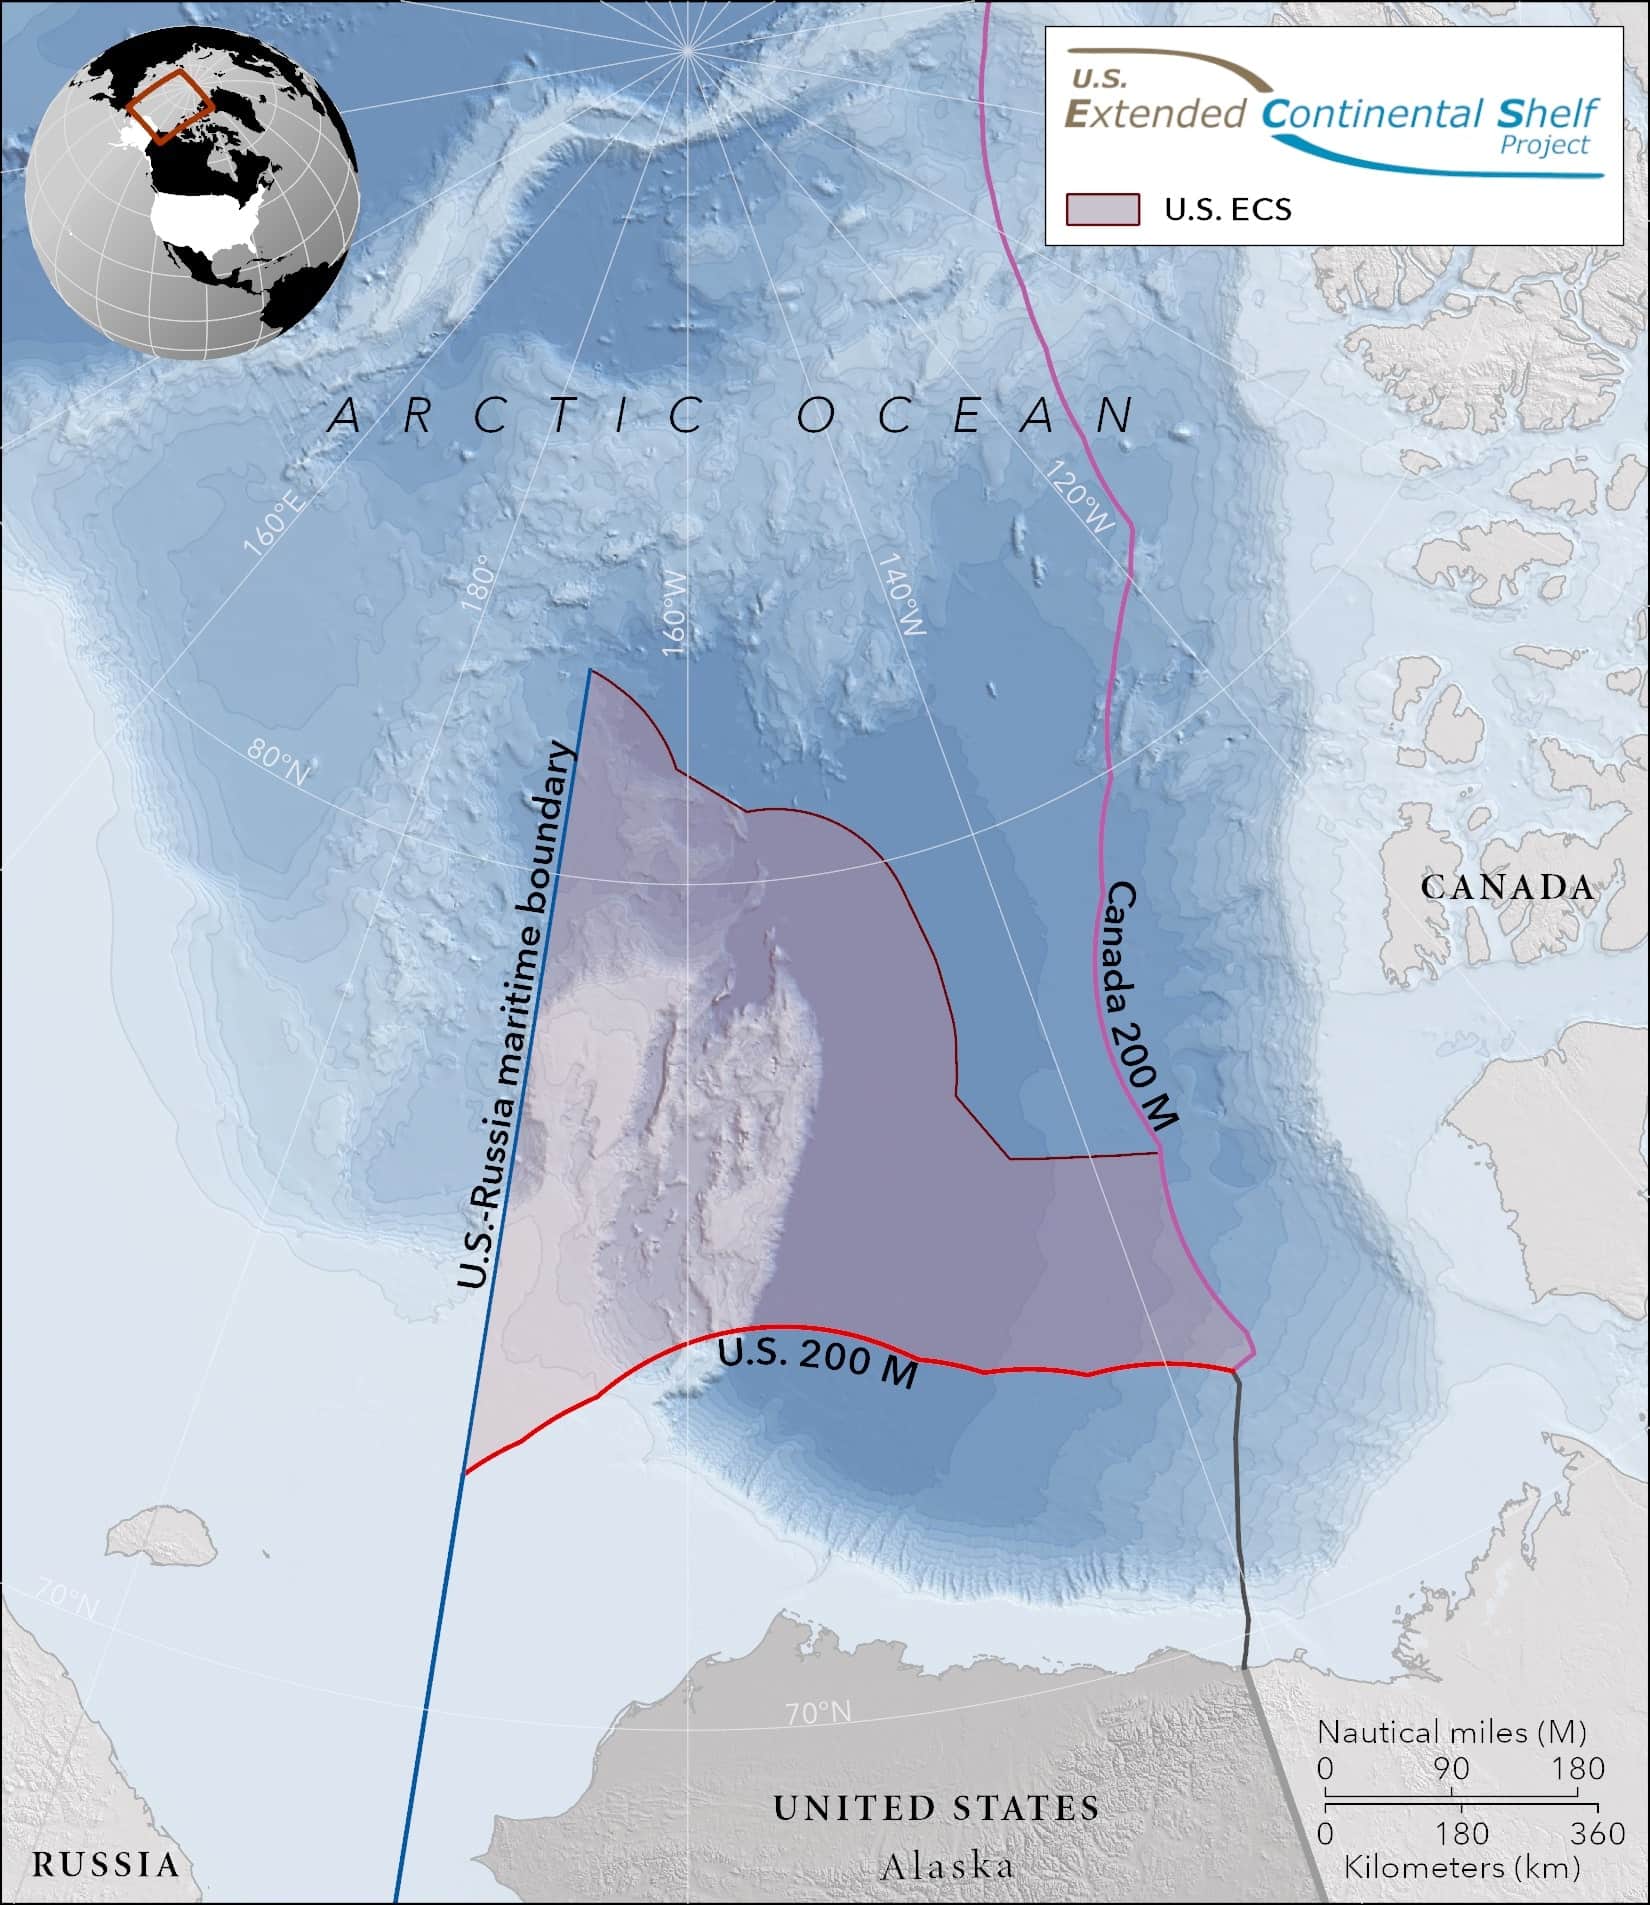 Zoomed-in version of the U.S. Arctic extended continental shelf claim showing parts of Russia, the U.S. and Canada